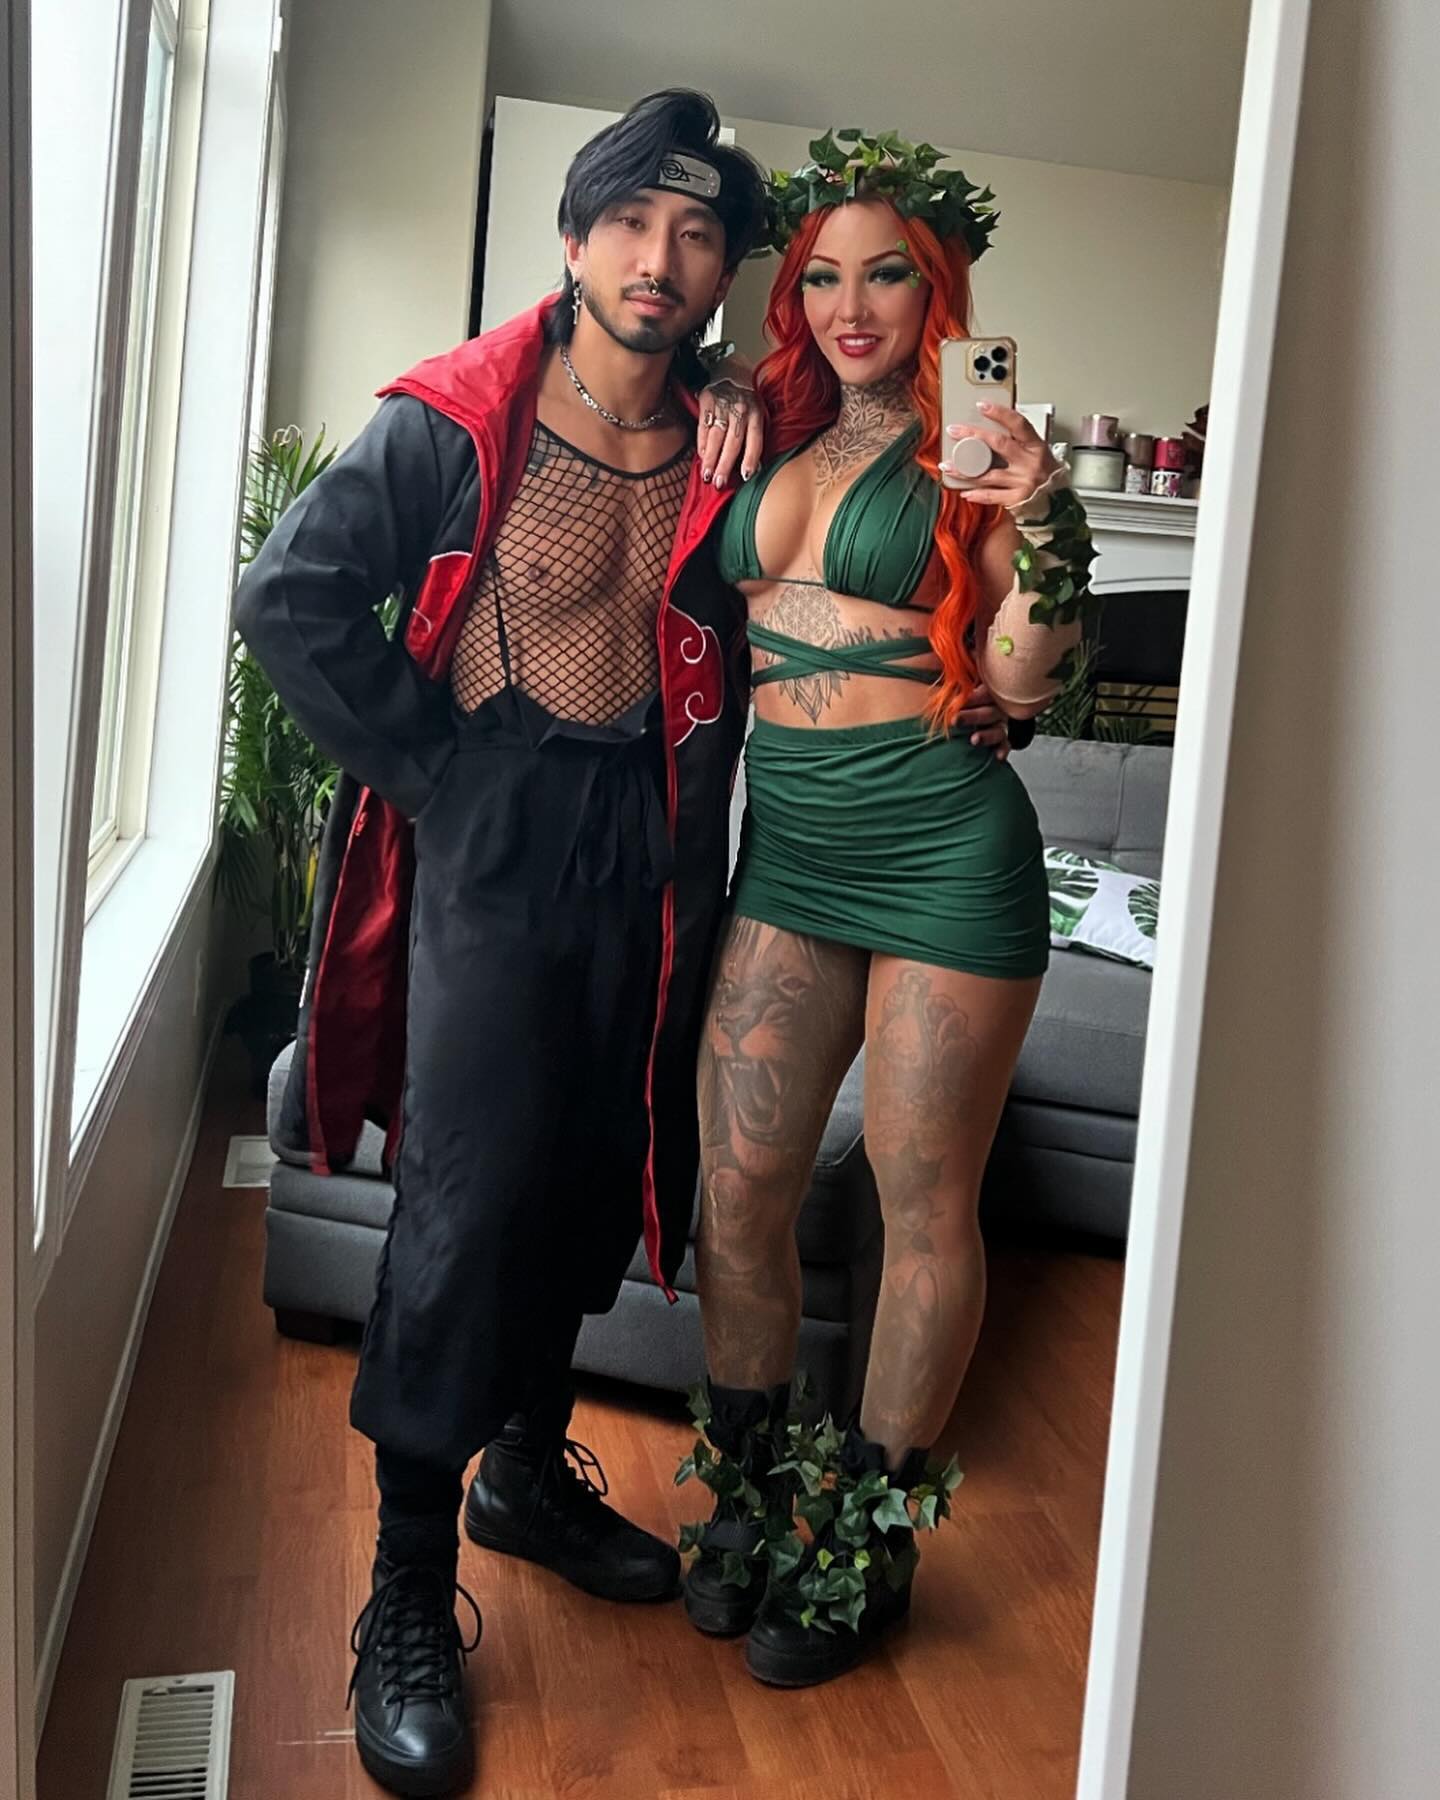 Itachi x Poison Ivy. Why does it kind of make sense though 😏 
#costumeparty #itachicosplay #poisonivycosplay #cosplaycouple